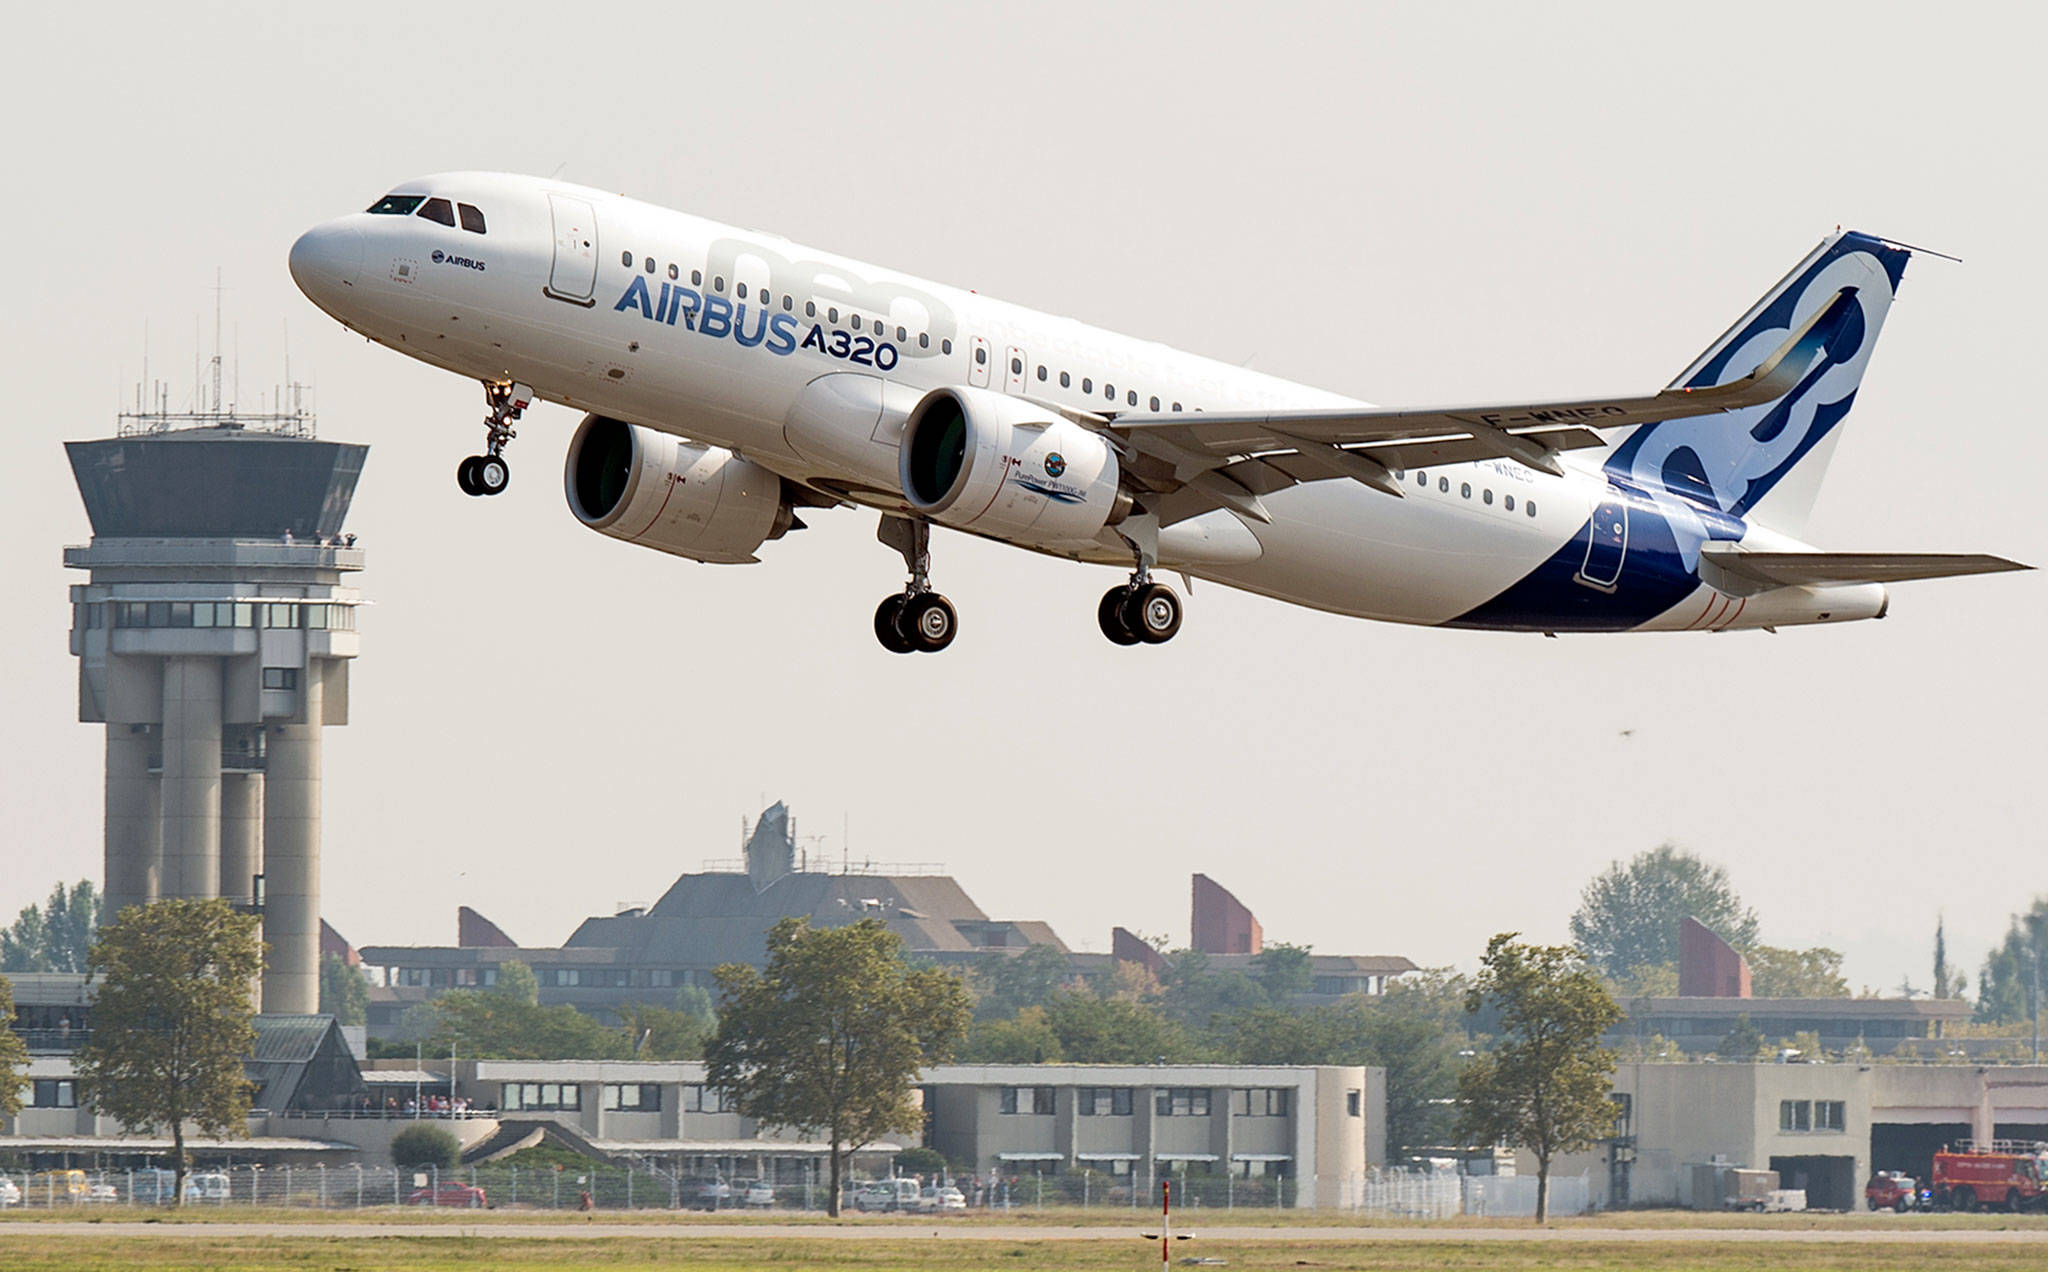 An Airbus A320neo takes off for its first test flight at Toulouse-Blagnac airport in France in 2014. (AP Photo/Frederic Lancelot)